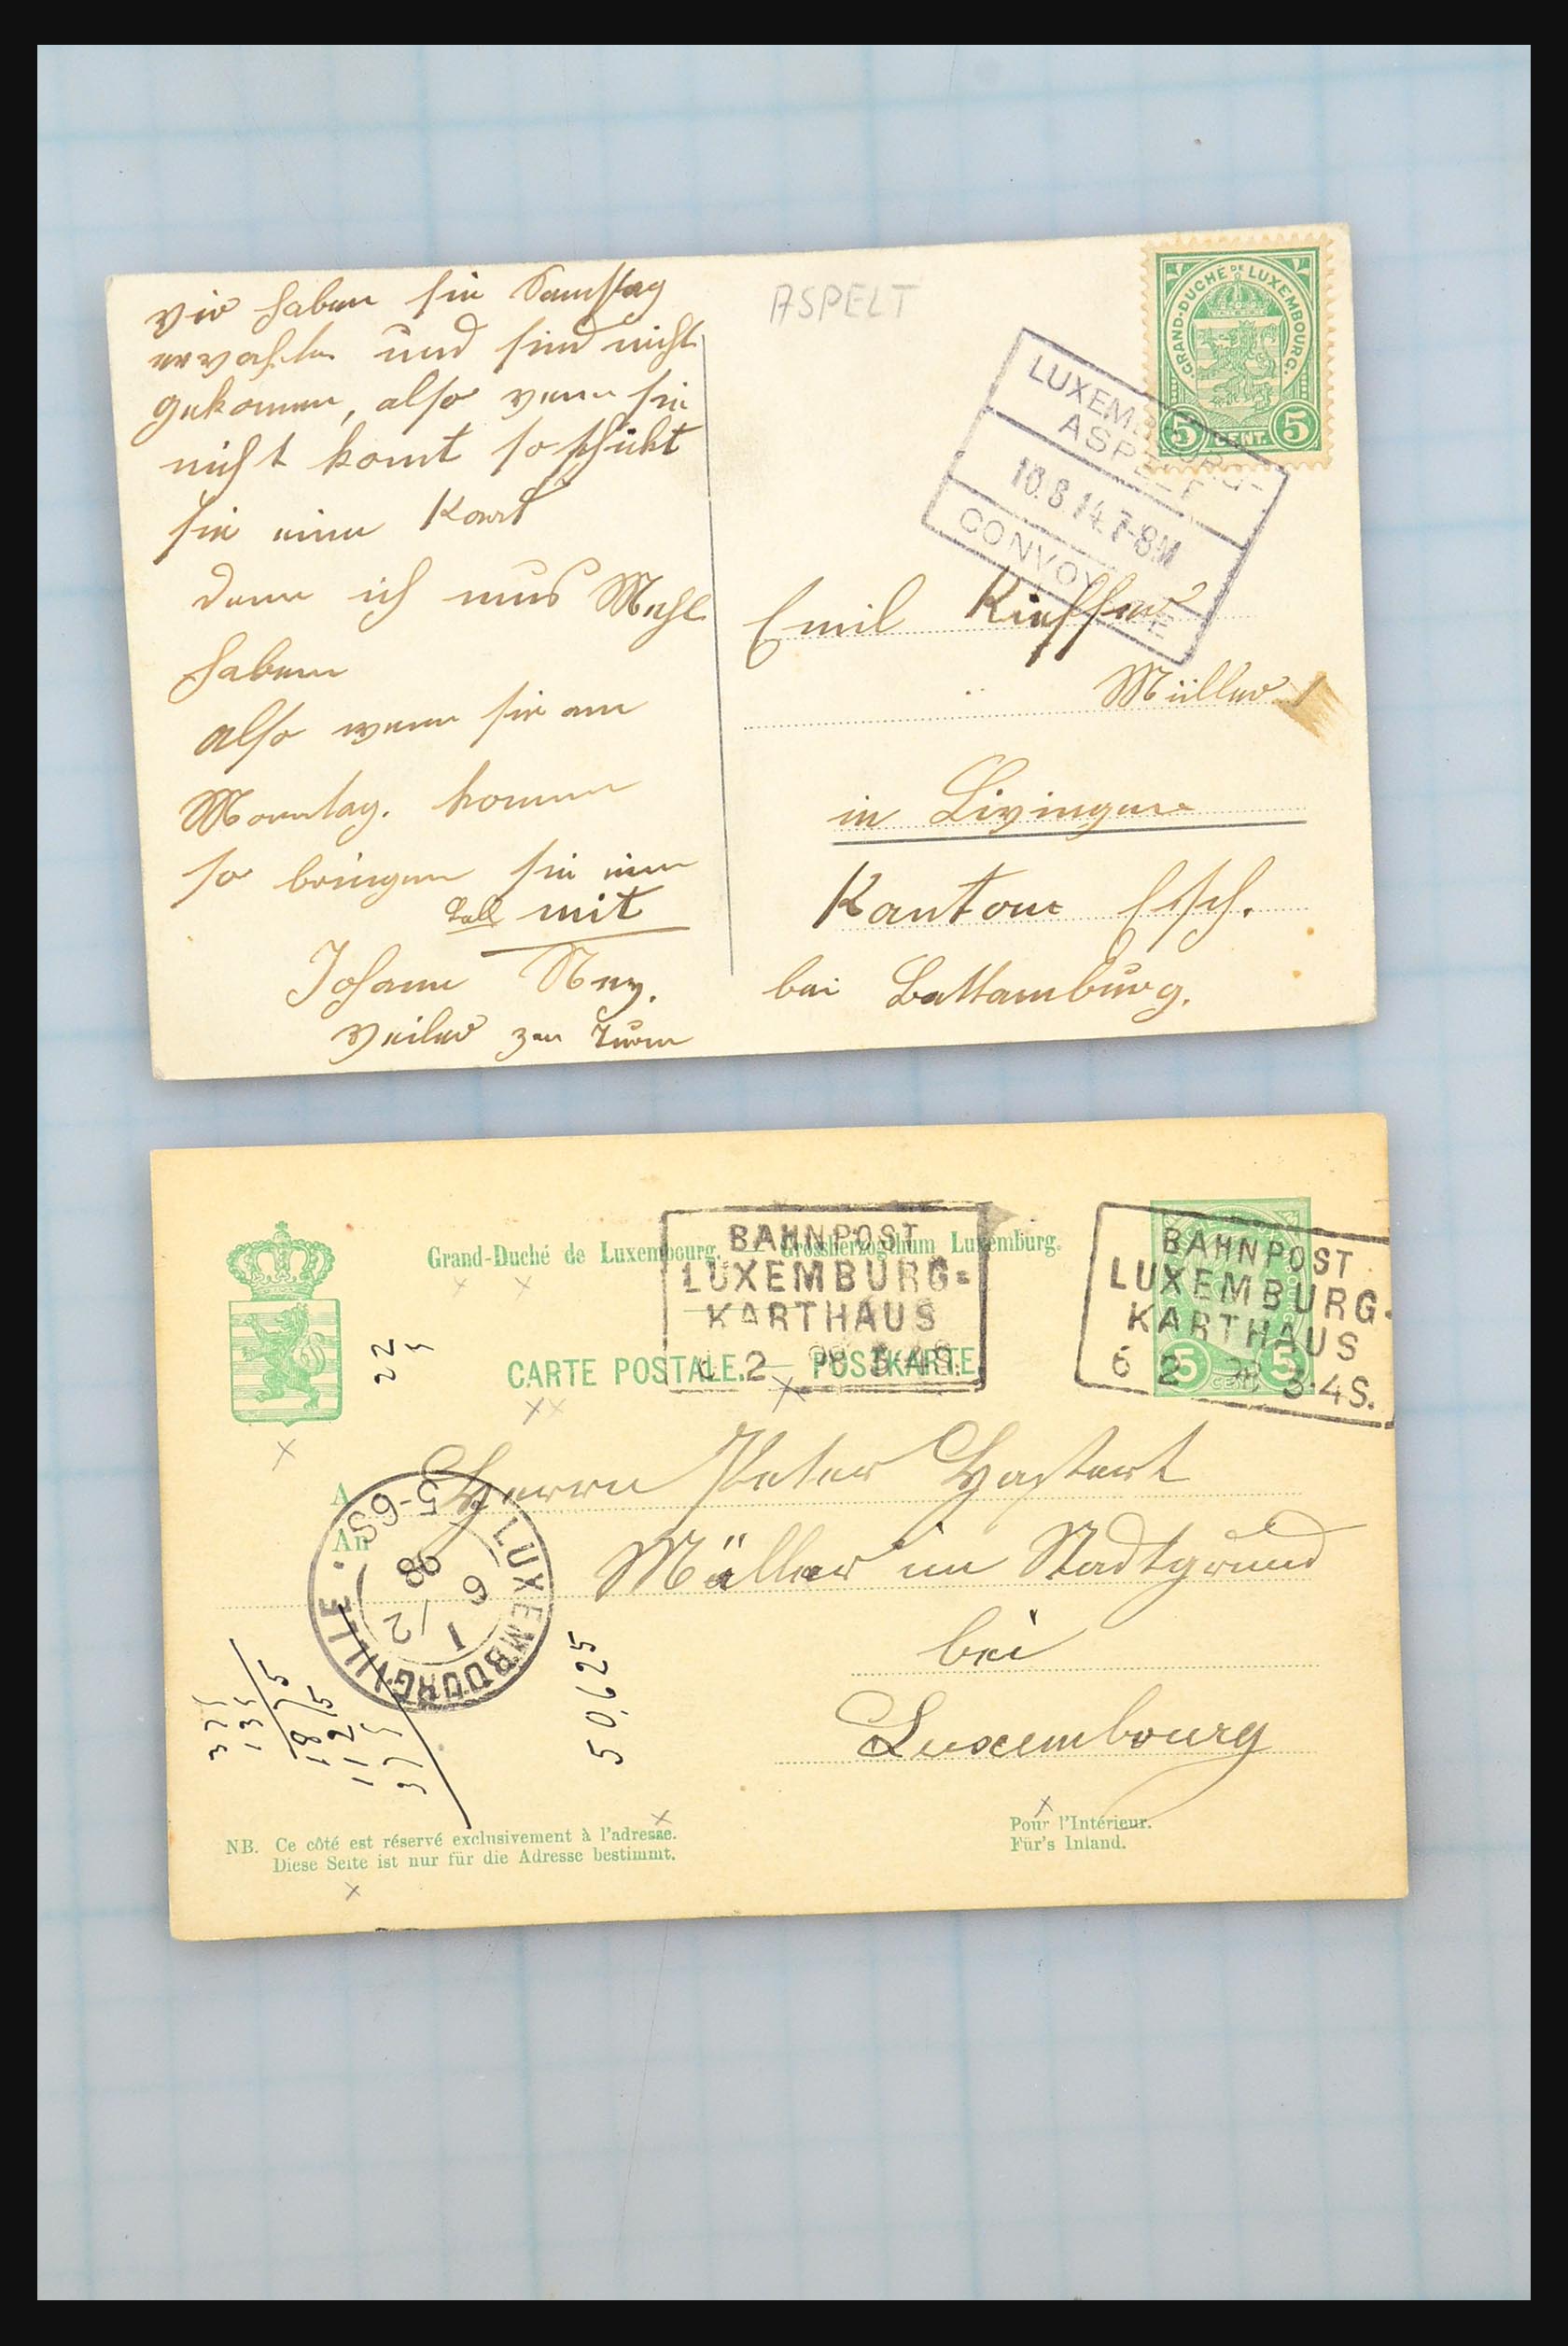 31358 093 - 31358 Portugal/Luxemburg/Greece covers 1880-1960.